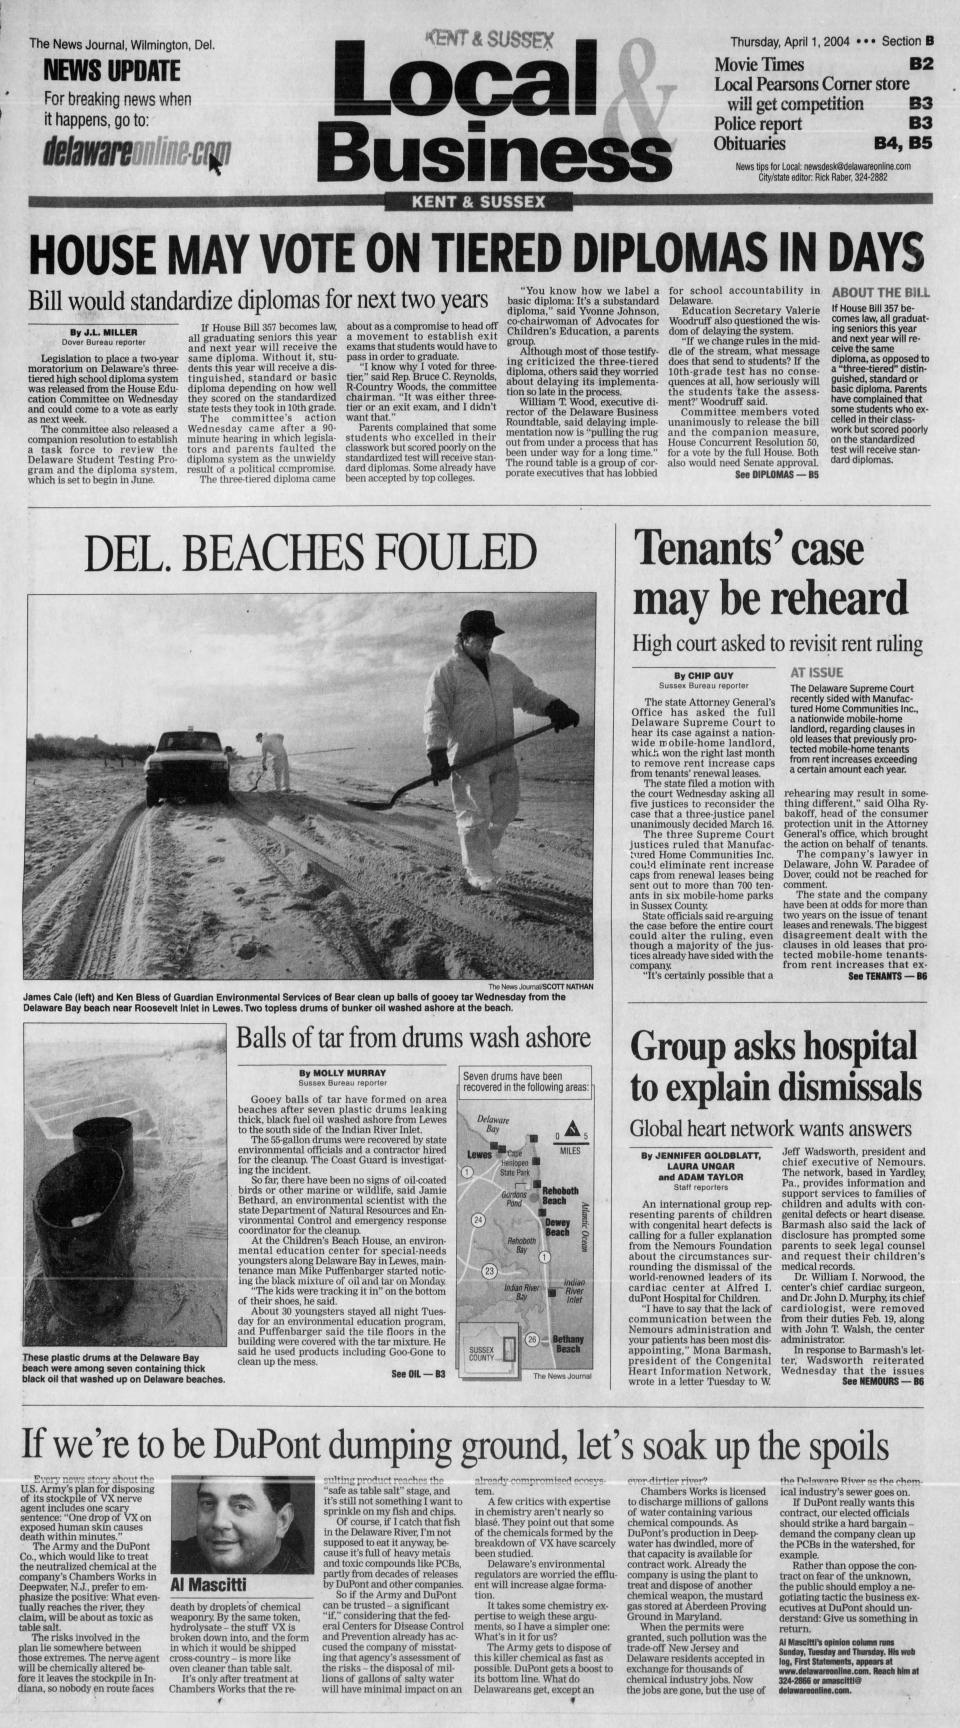 Page B1 of The News Journal from April 1, 2004.